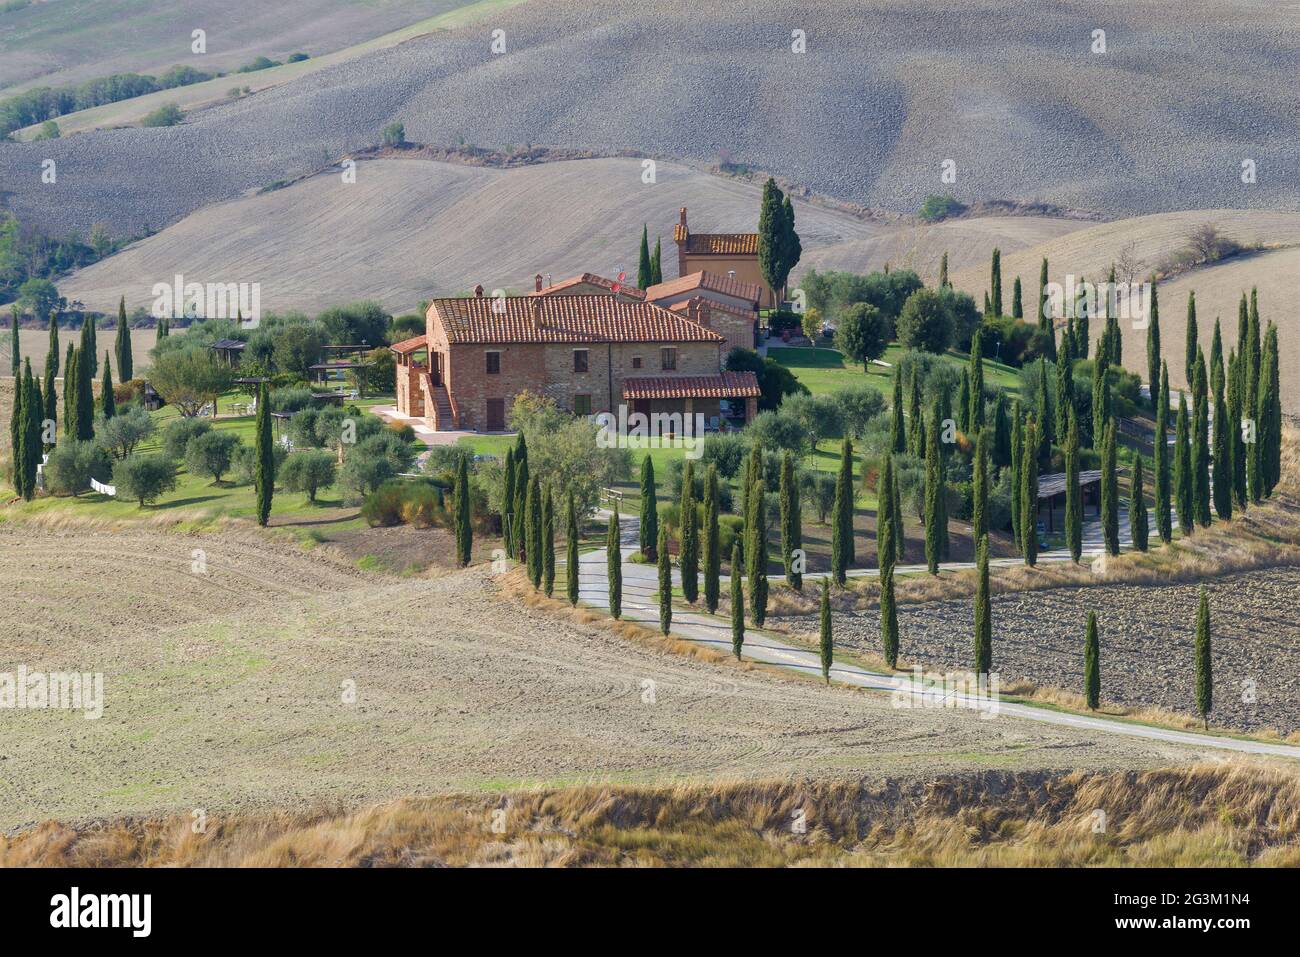 TUSCANY, ITALY - SEPTEMBER 23, 2017: A old rural estate in the Tuscan landscape on September afternoon. Italy Stock Photo